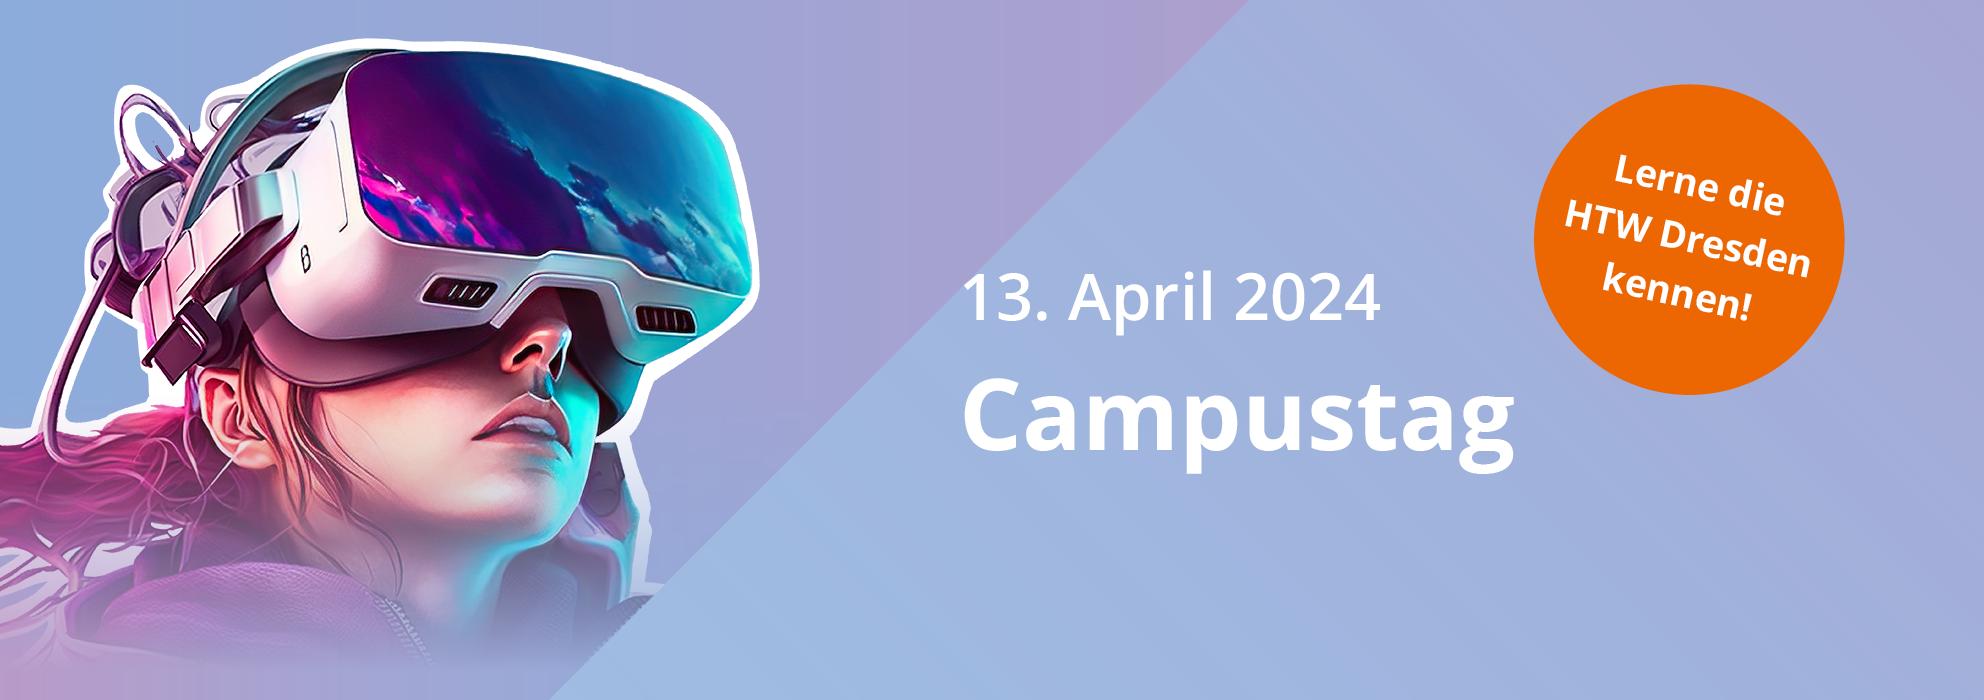 [Translate to English:] Campustag 13.4.24